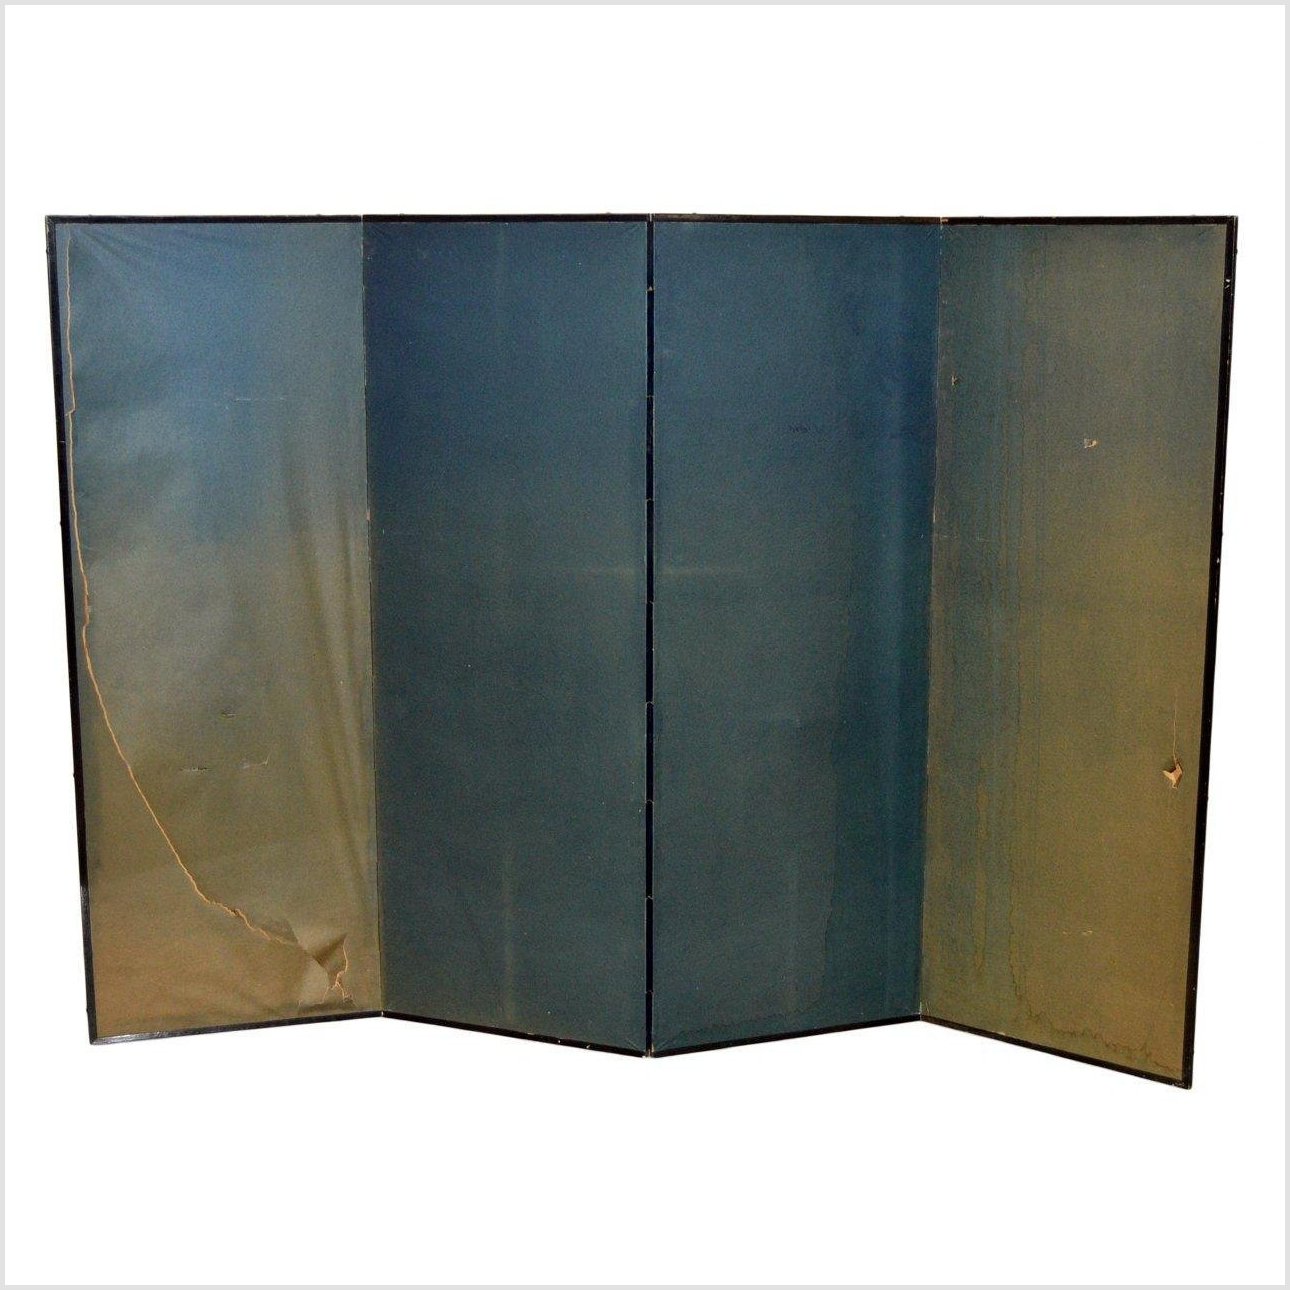 4-Panel Distressed Look Screen-YN2801-3. Asian & Chinese Furniture, Art, Antiques, Vintage Home Décor for sale at FEA Home